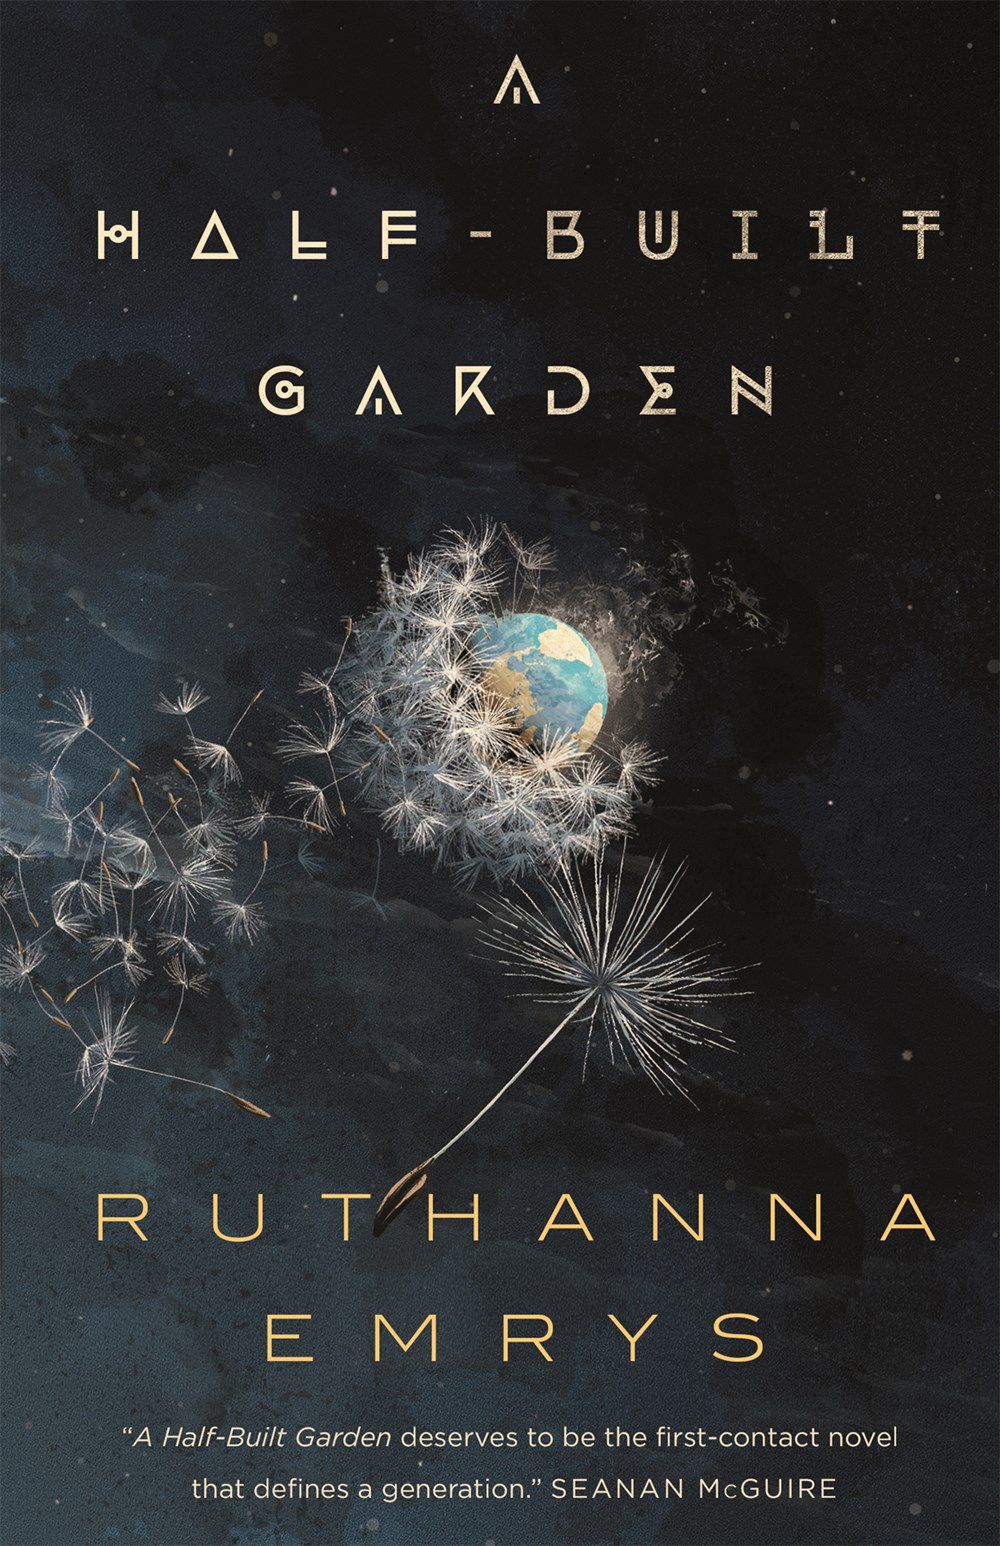 Cover image for A Half-Built Garden, which features the remote Earth surrounded by dandelion seeds.